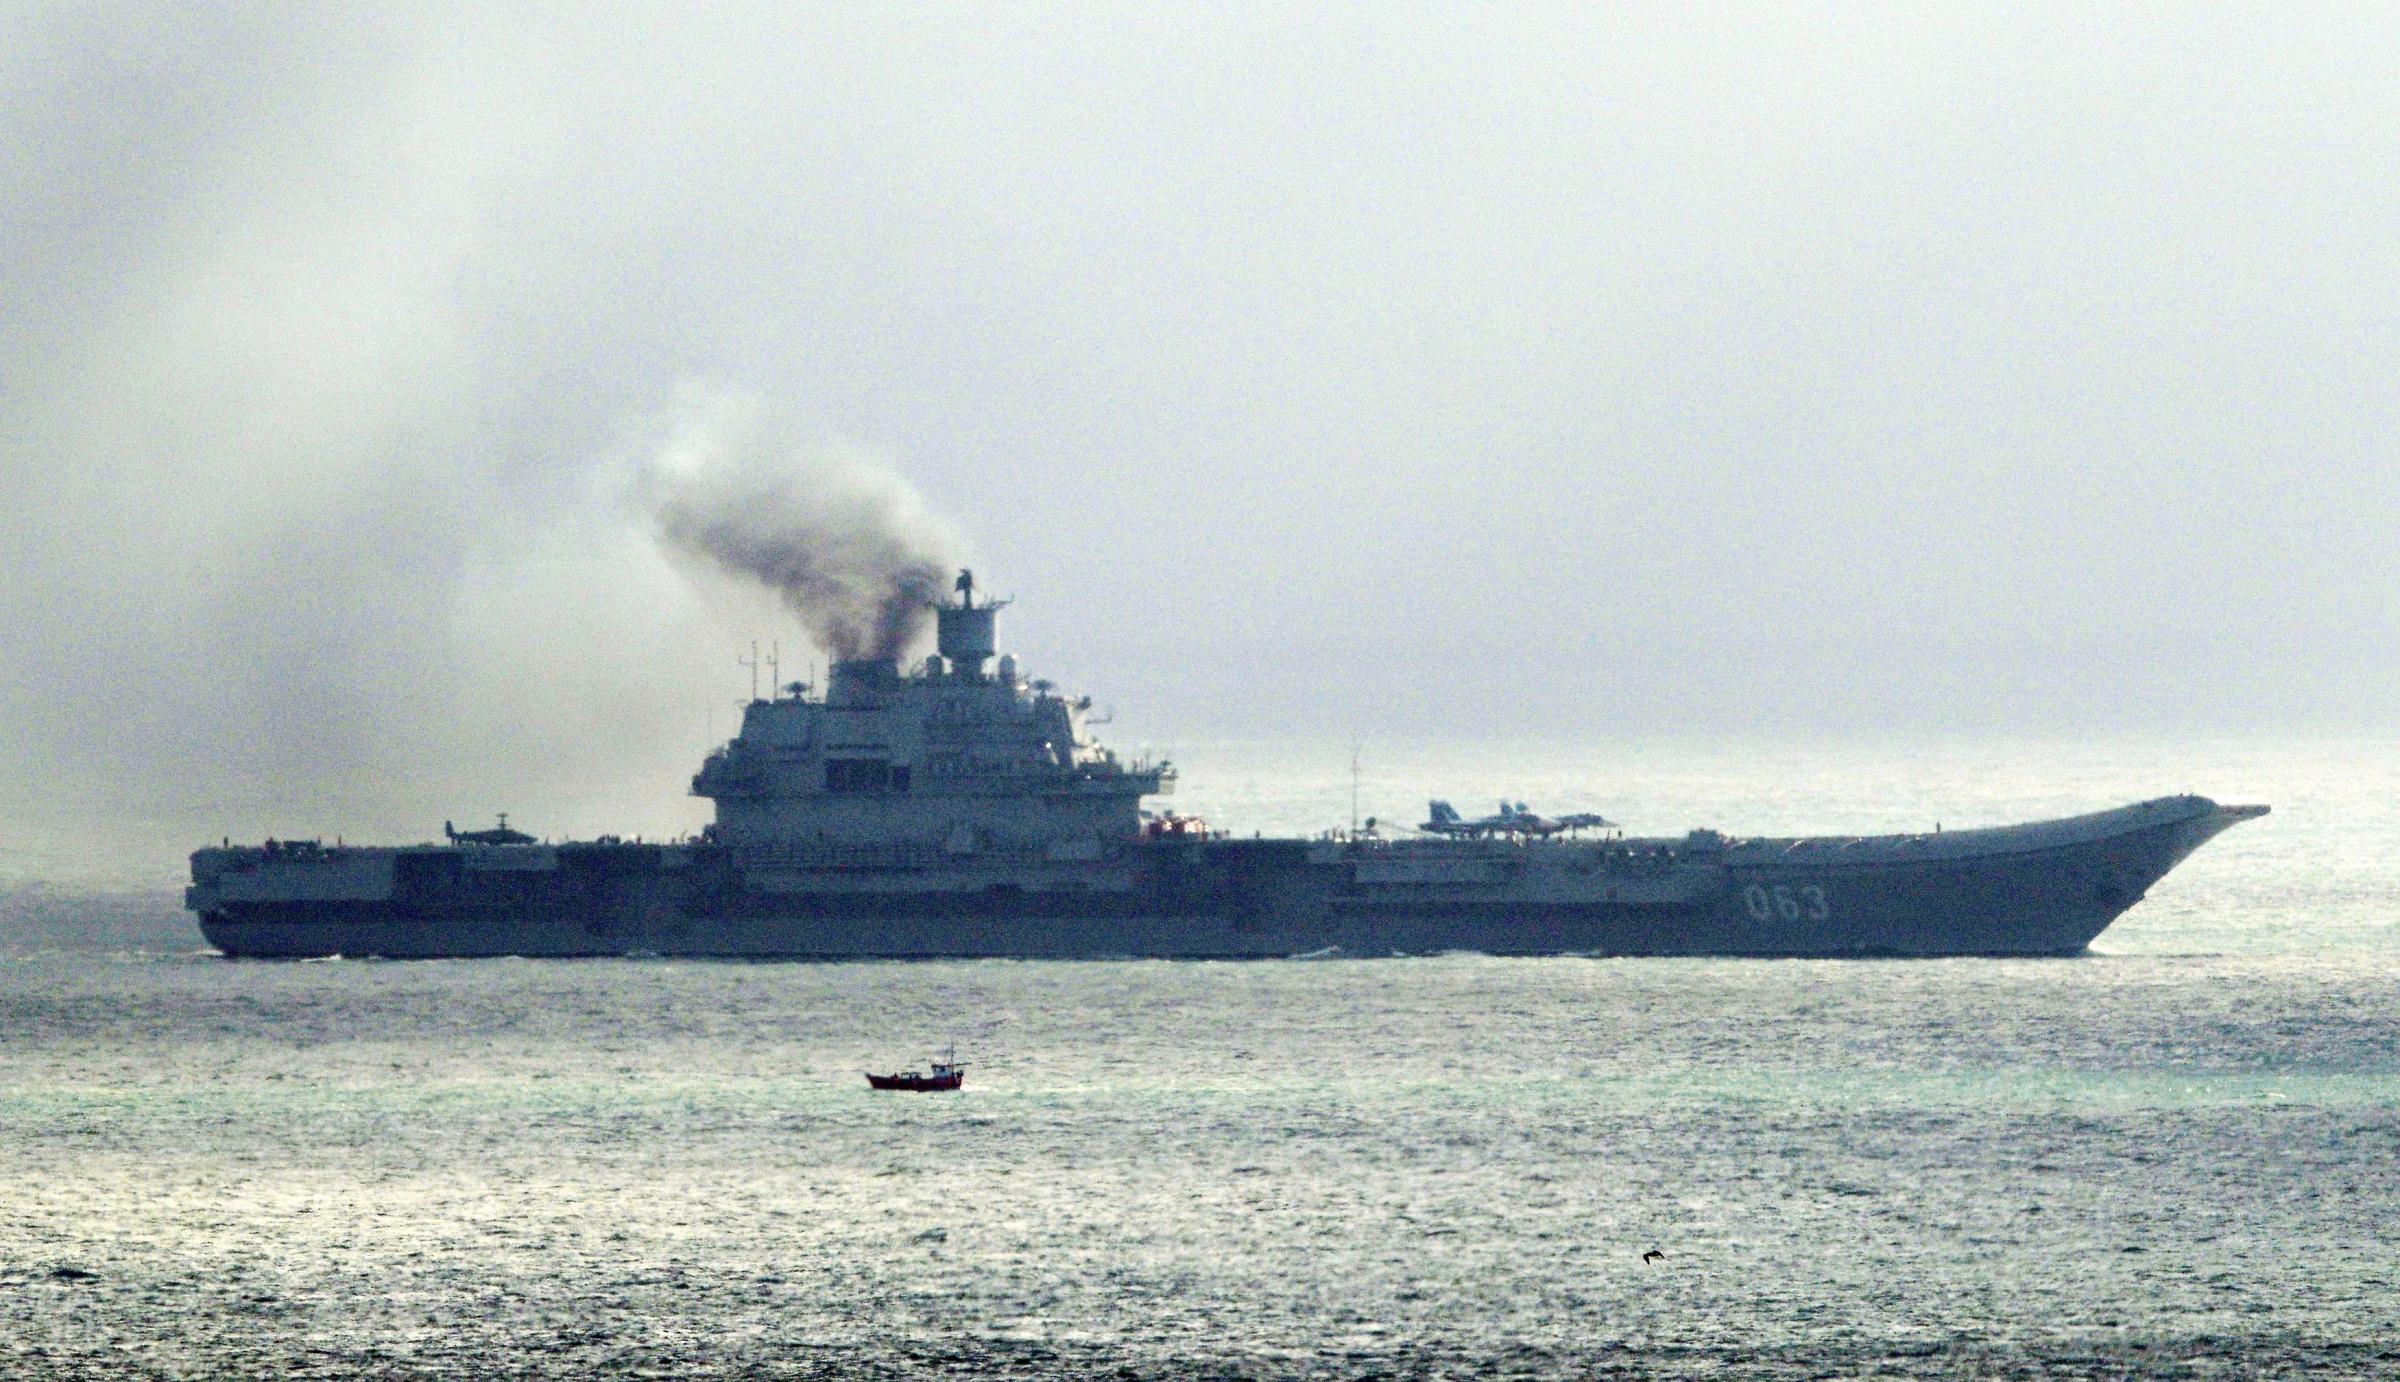 Russian flotilla watched by Royal Navy as it passes through Dover Strait